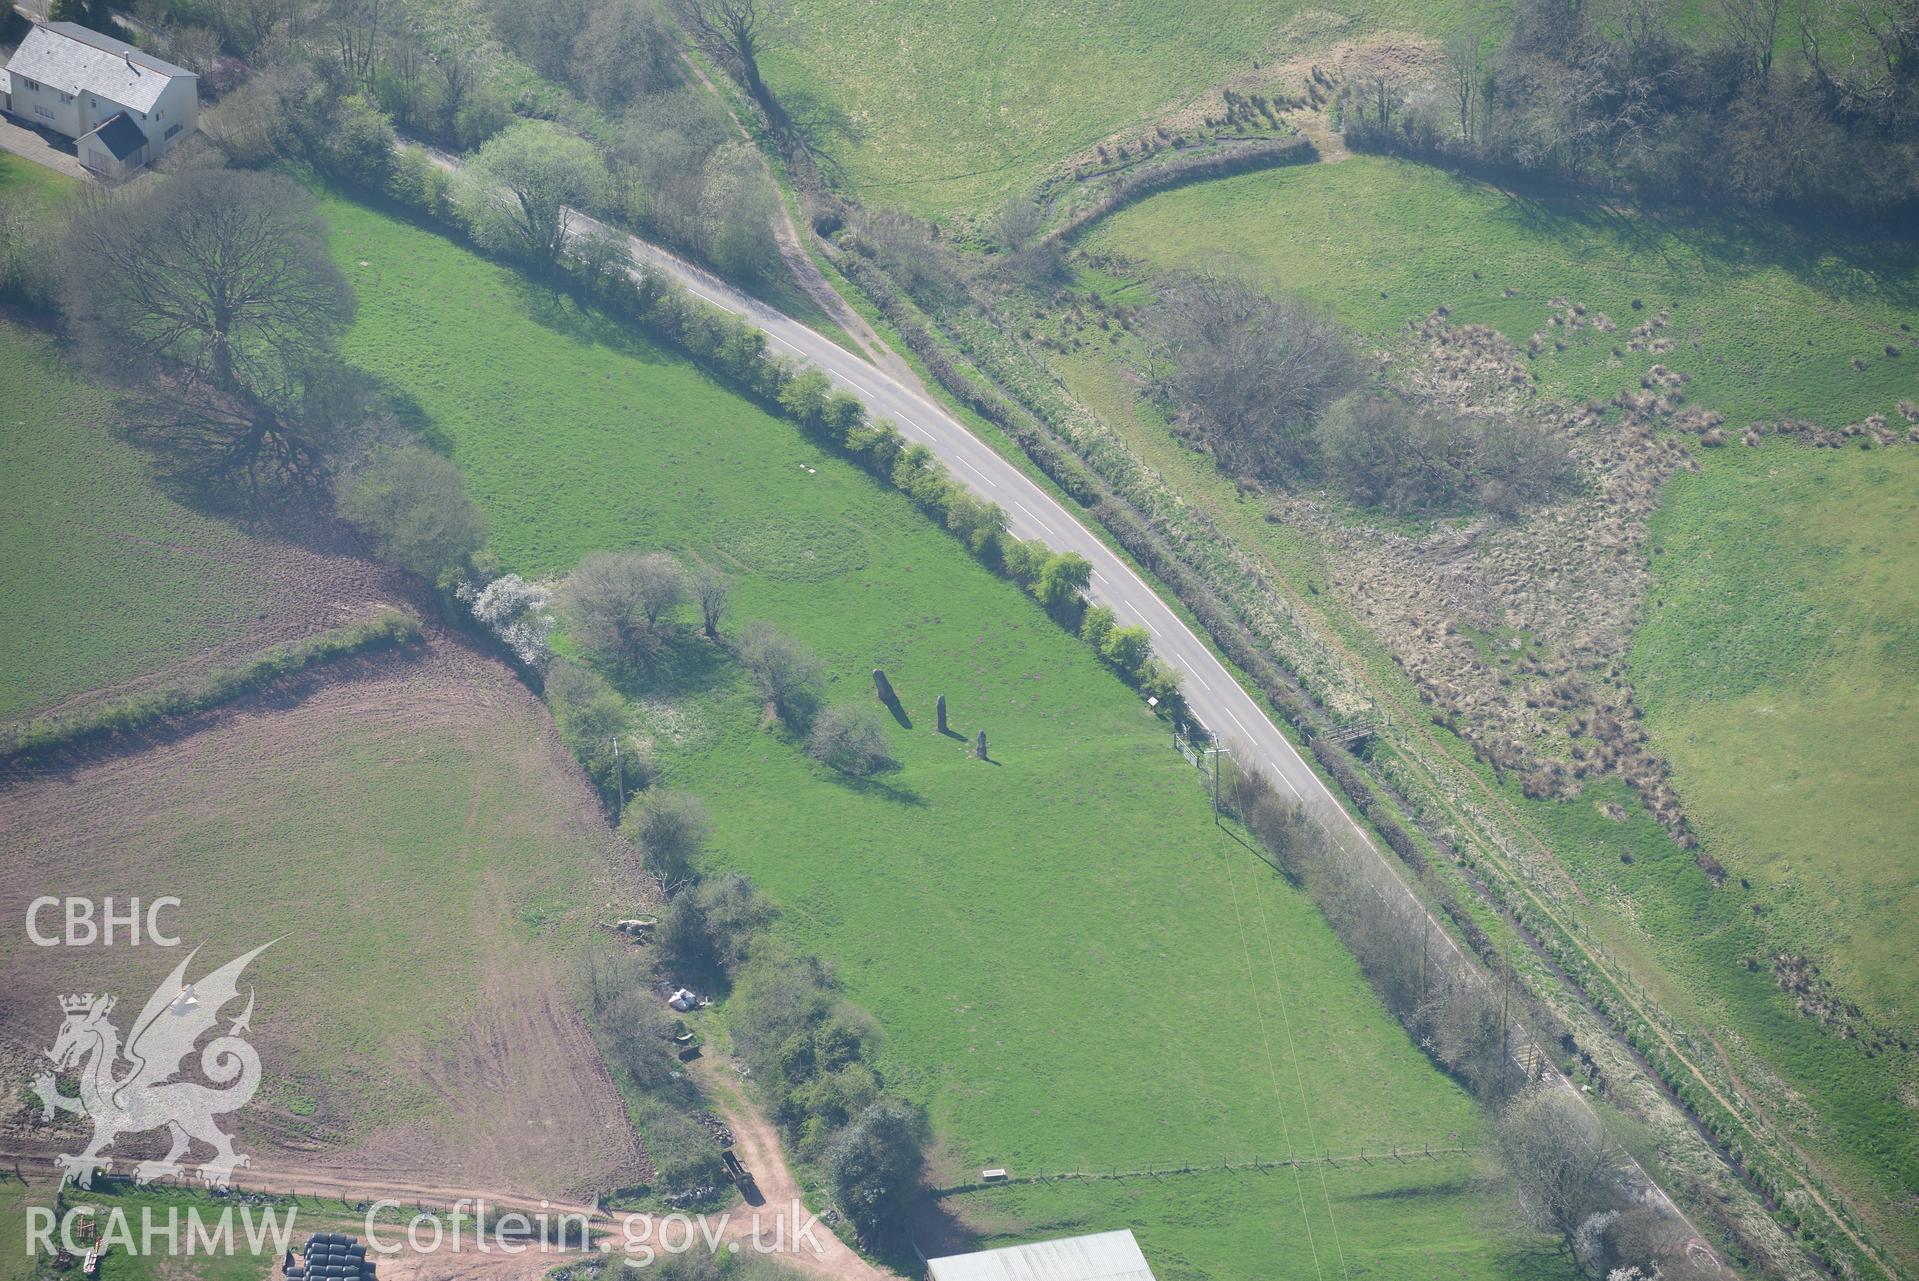 Harold's Stones, Trellech. Oblique aerial photograph taken during the Royal Commission's programme of archaeological aerial reconnaissance by Toby Driver on 21st April 2015.